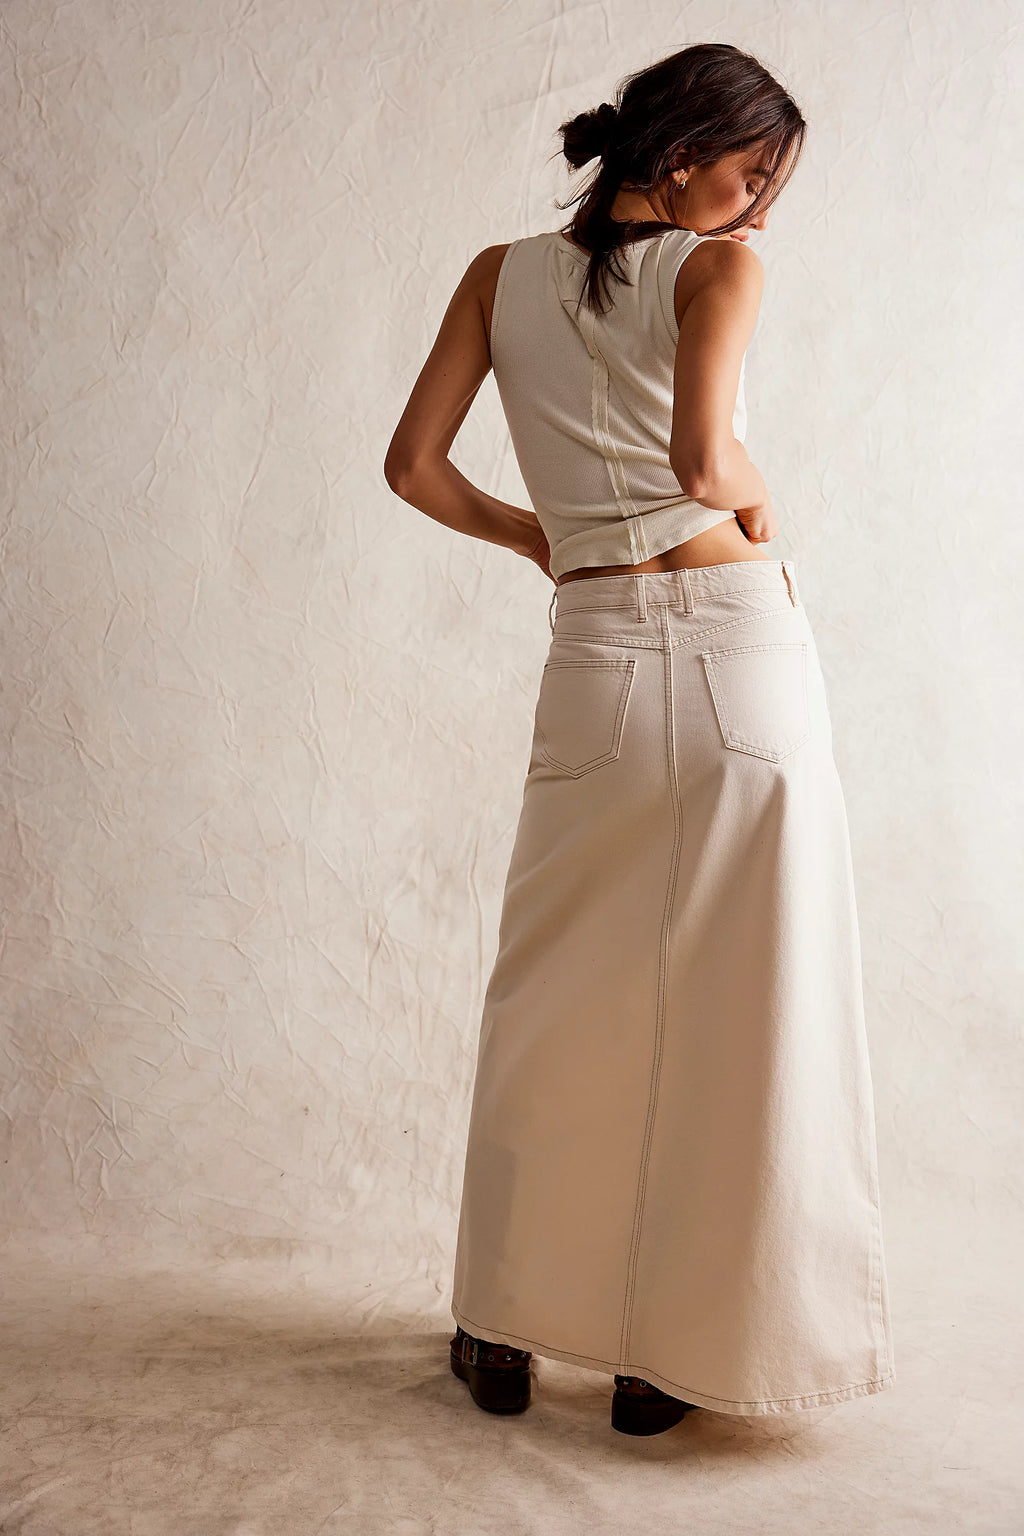 Come As You Are Denim Maxi Skirt - Ivory